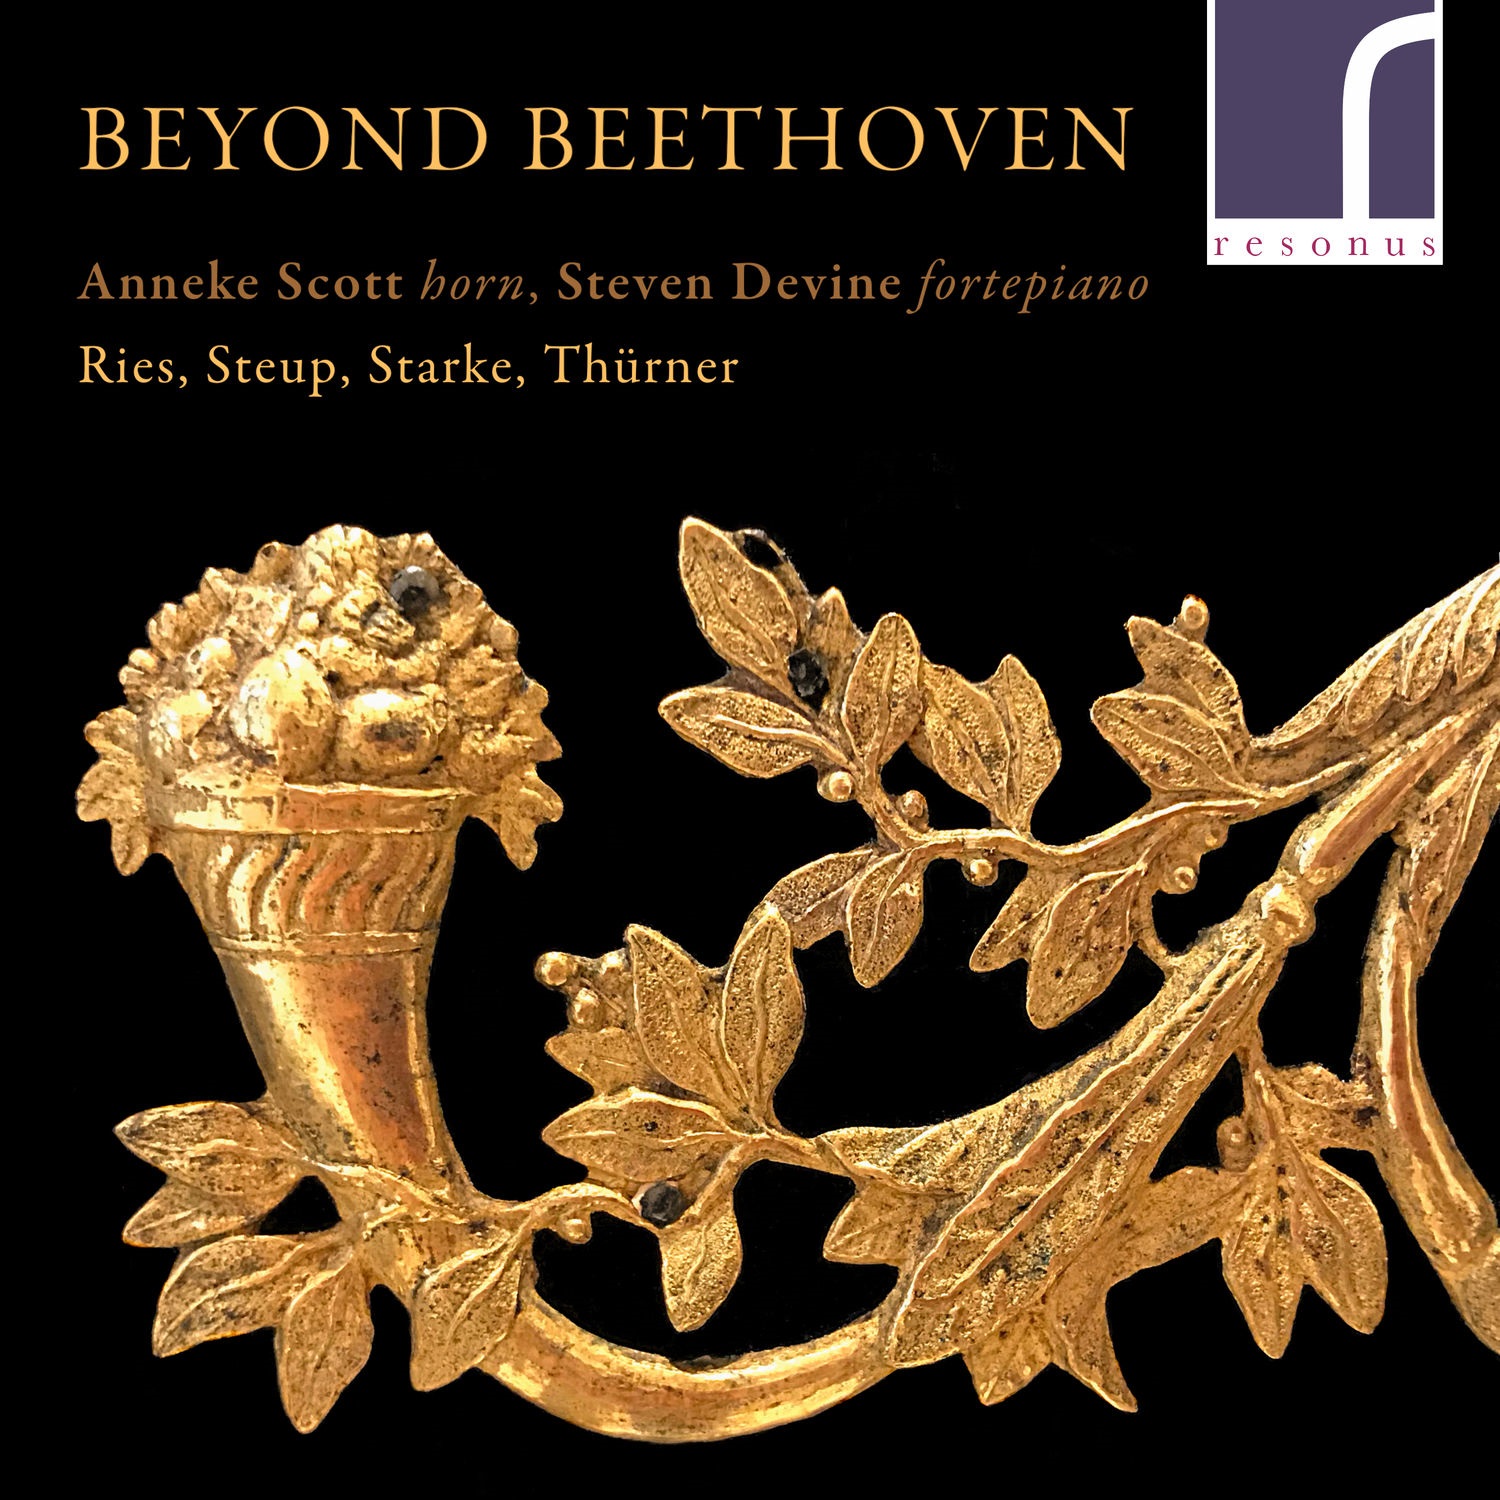 Anneke Scott & Steven Devine - Beyond Beethoven: Works for Natural Horn and Fortepiano (2021) [FLAC 24bit/96kHz]